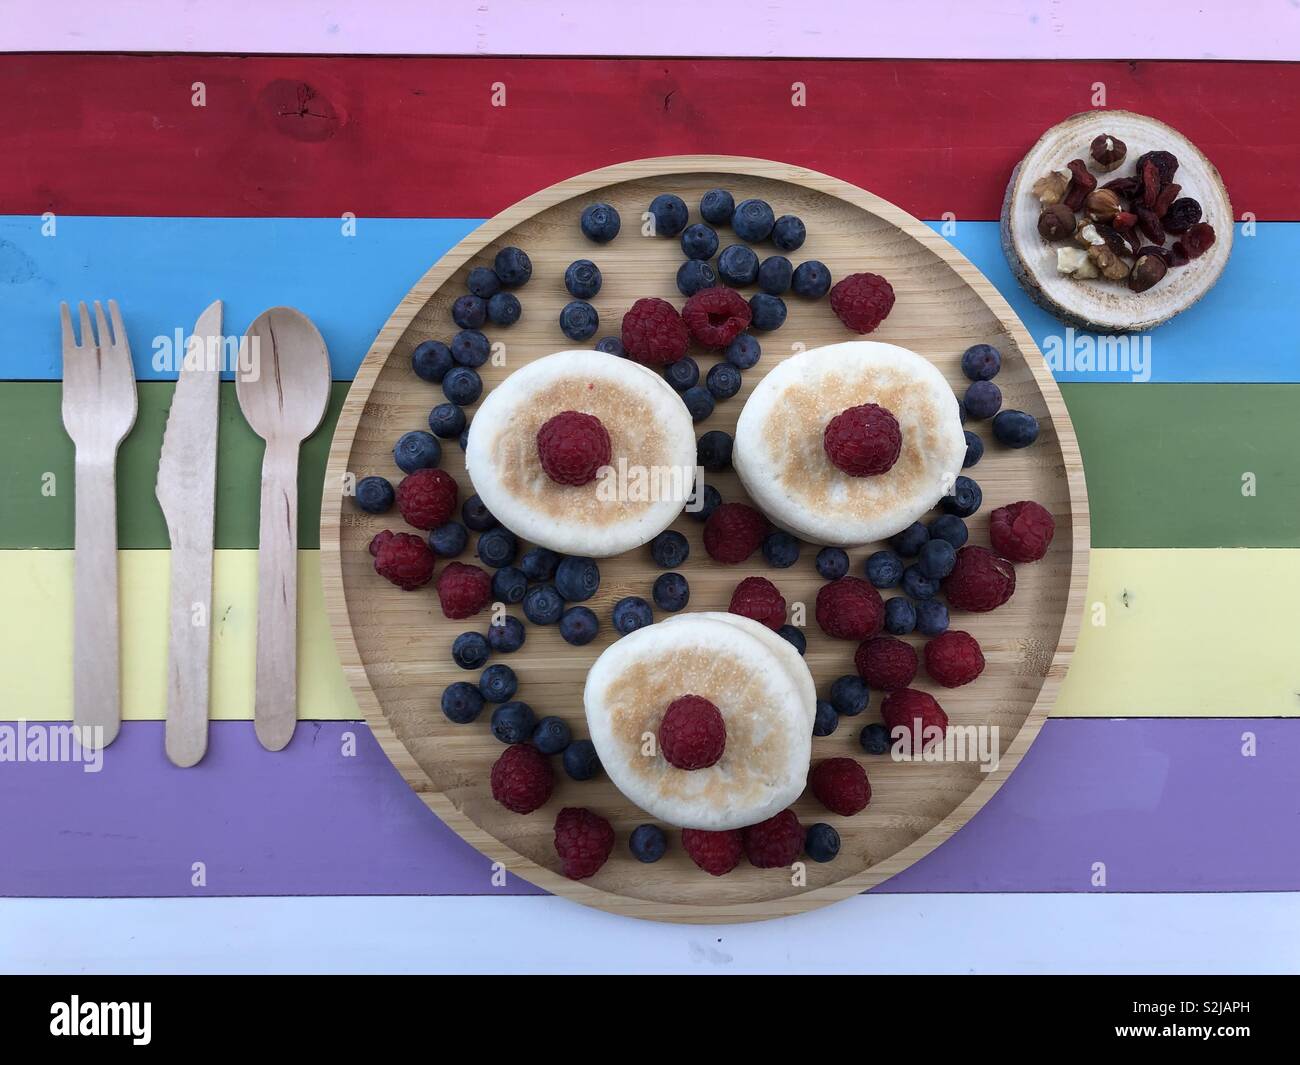 Pancake with blueberries, raspberry and dry fruit on a multi colored wooden board and wood cutlery Stock Photo